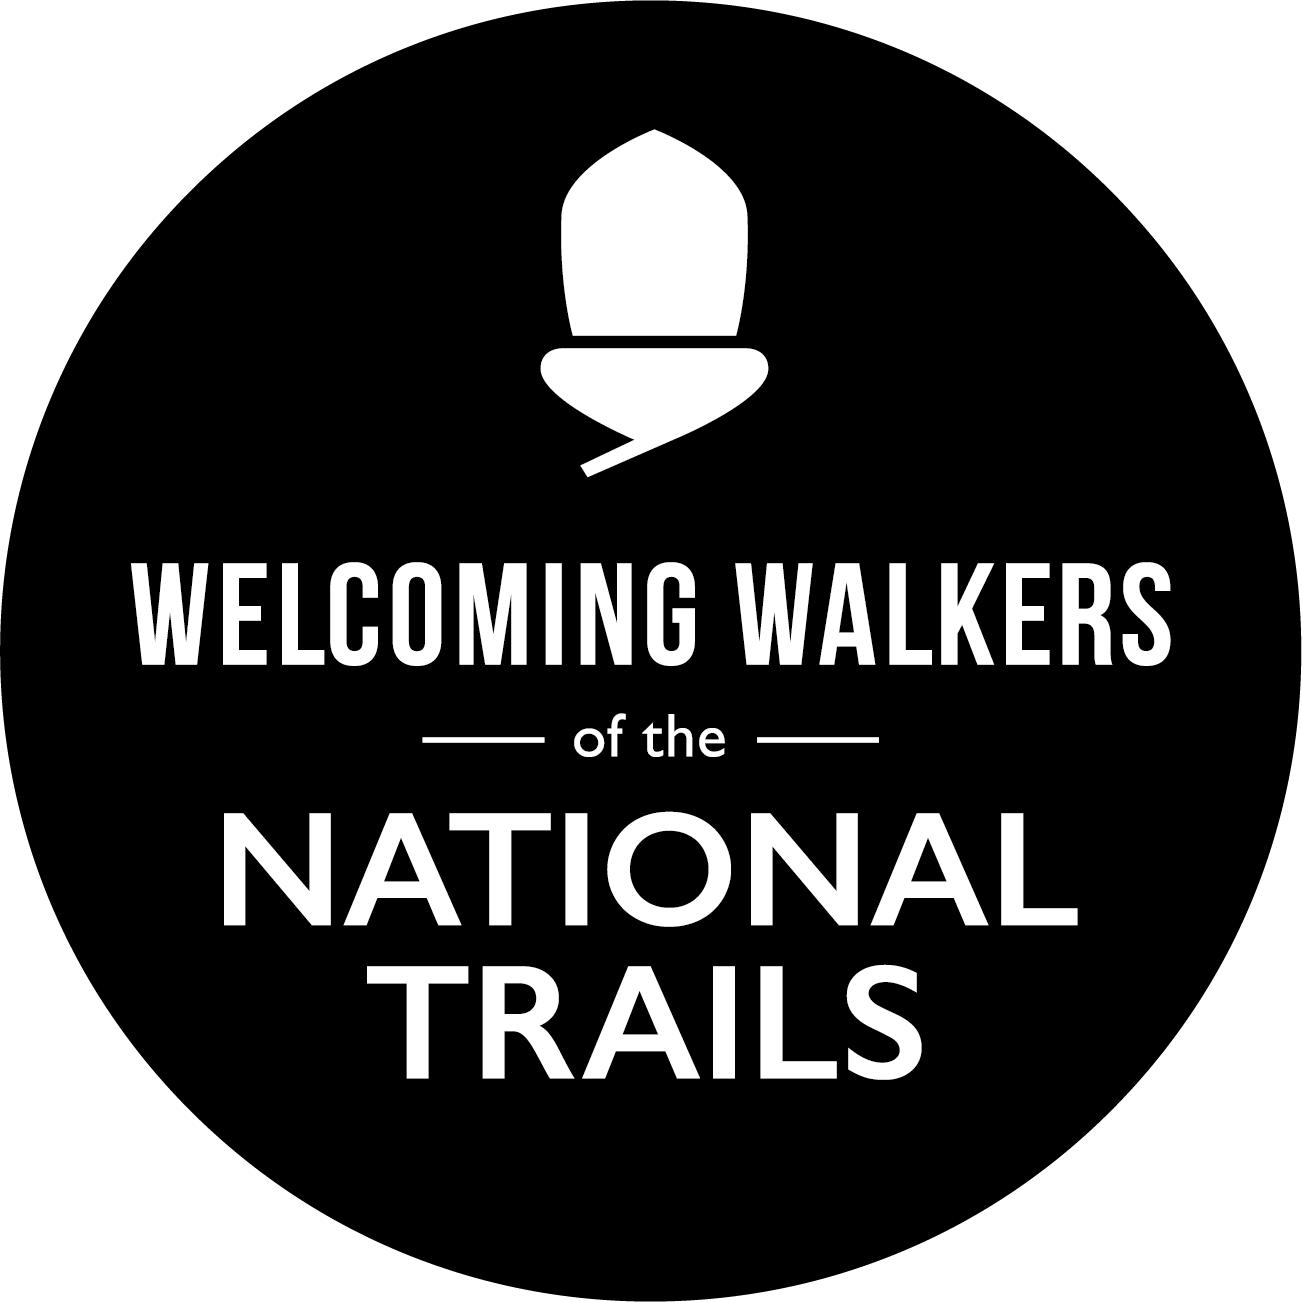 National Trail - Welcome Walkers Logo